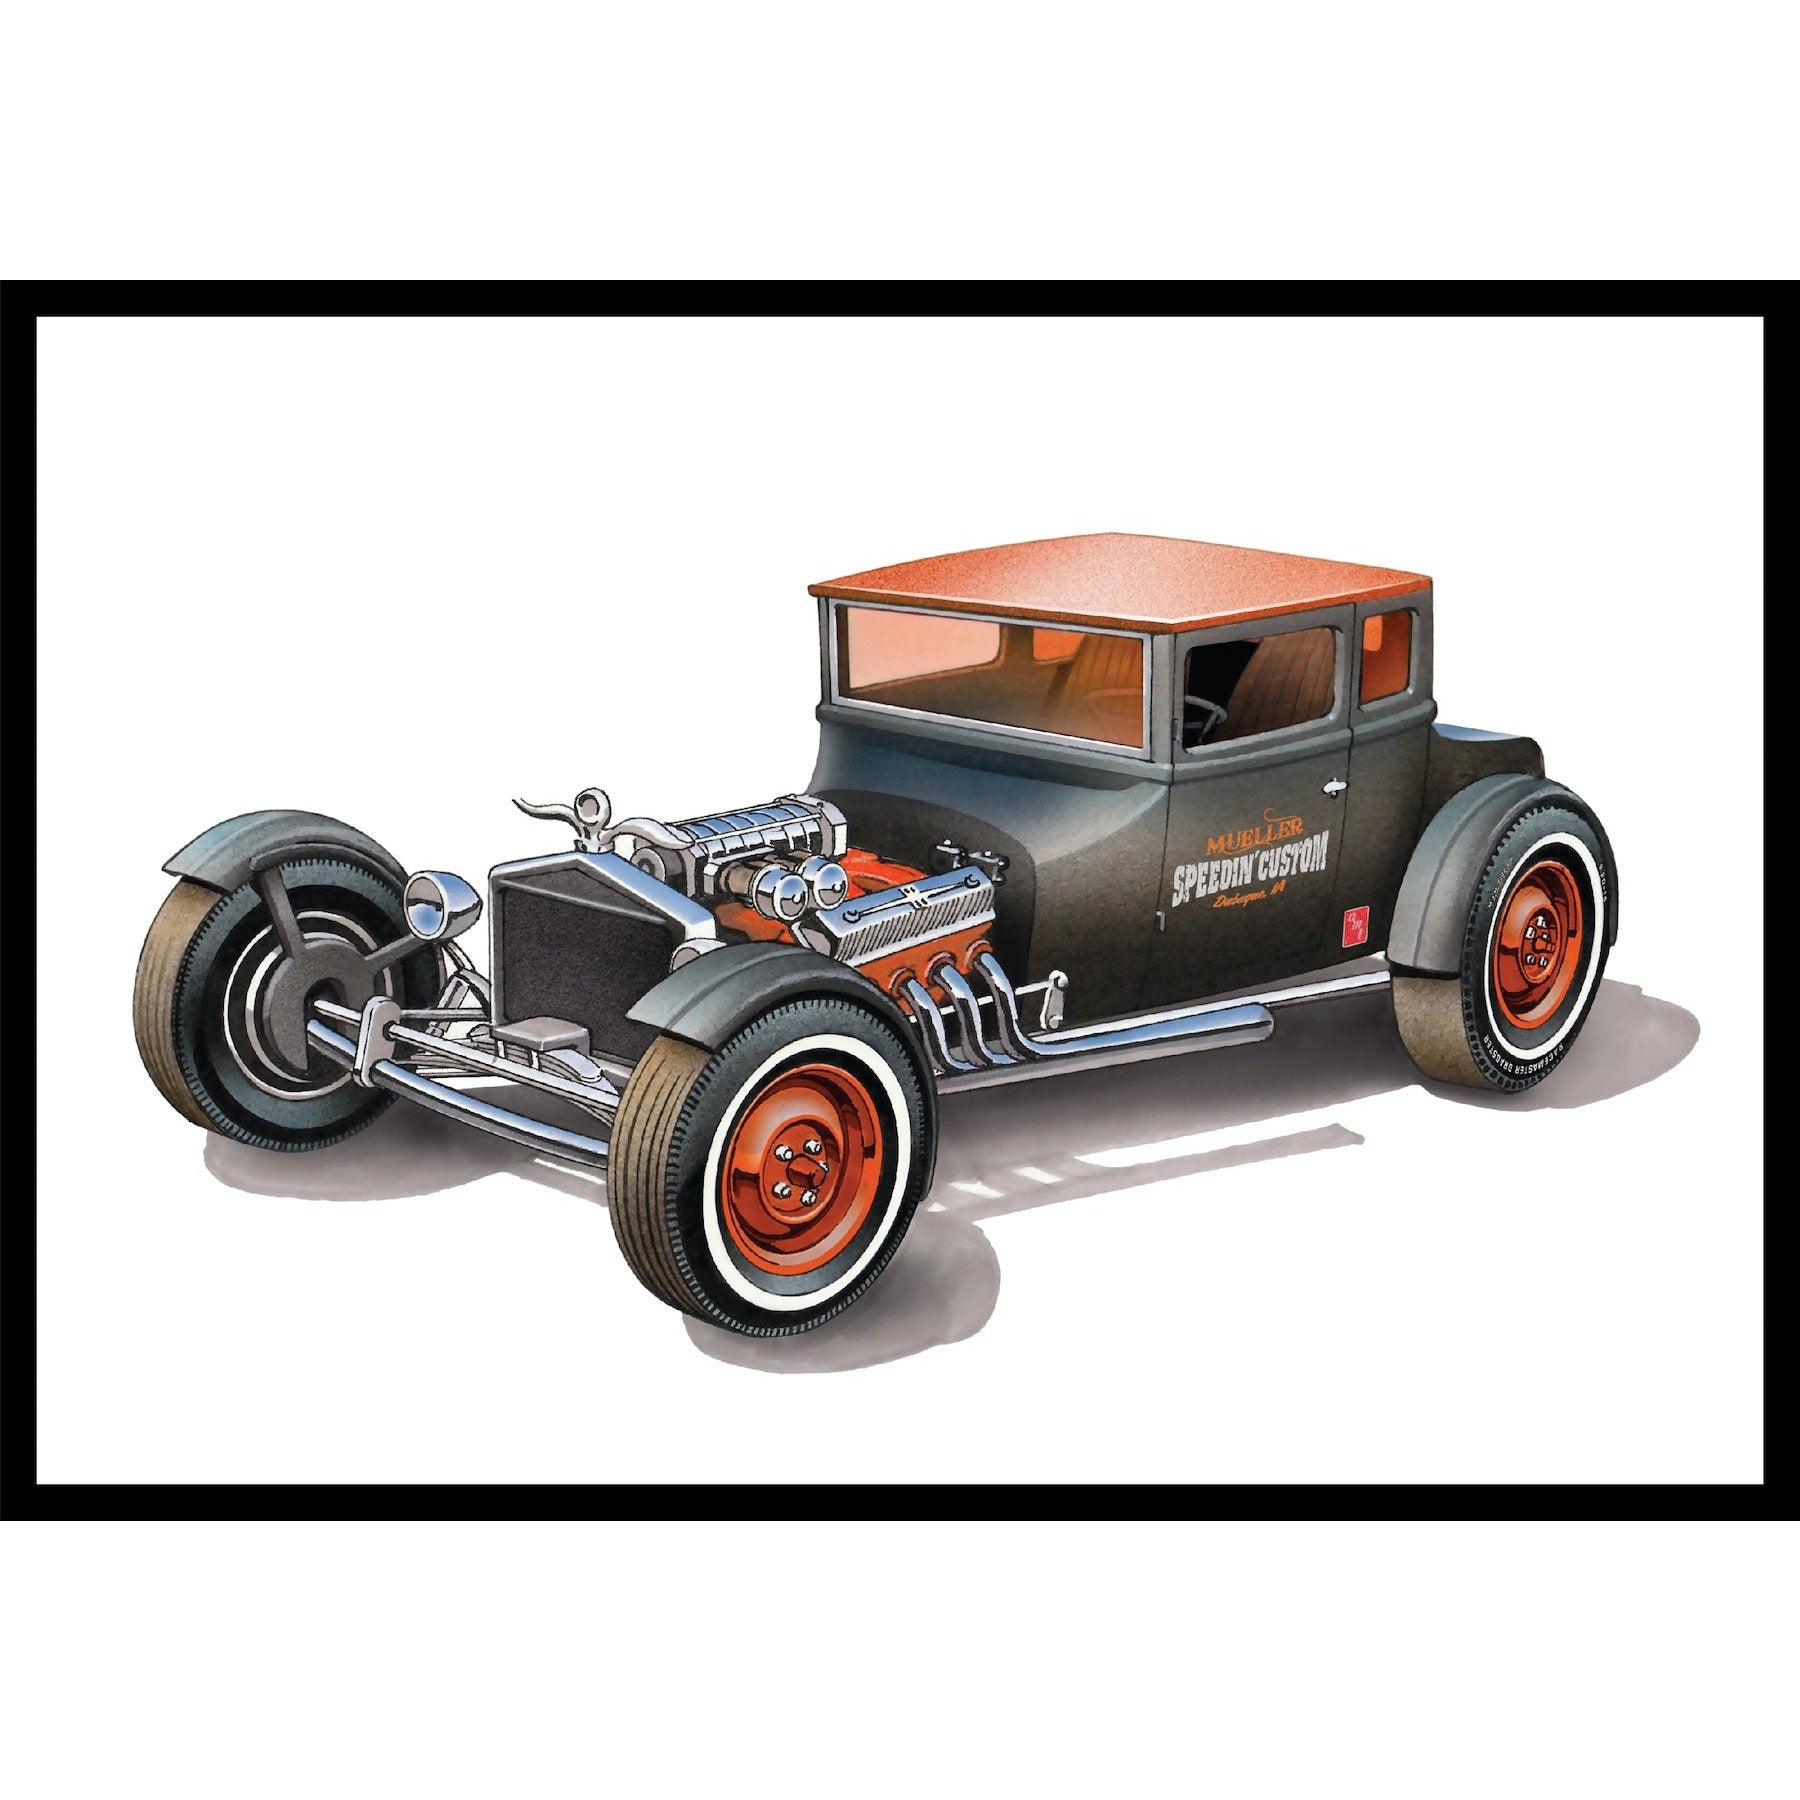 1925 Ford T "Chopped" 1/25 Model Car Kit #1167 by AMT